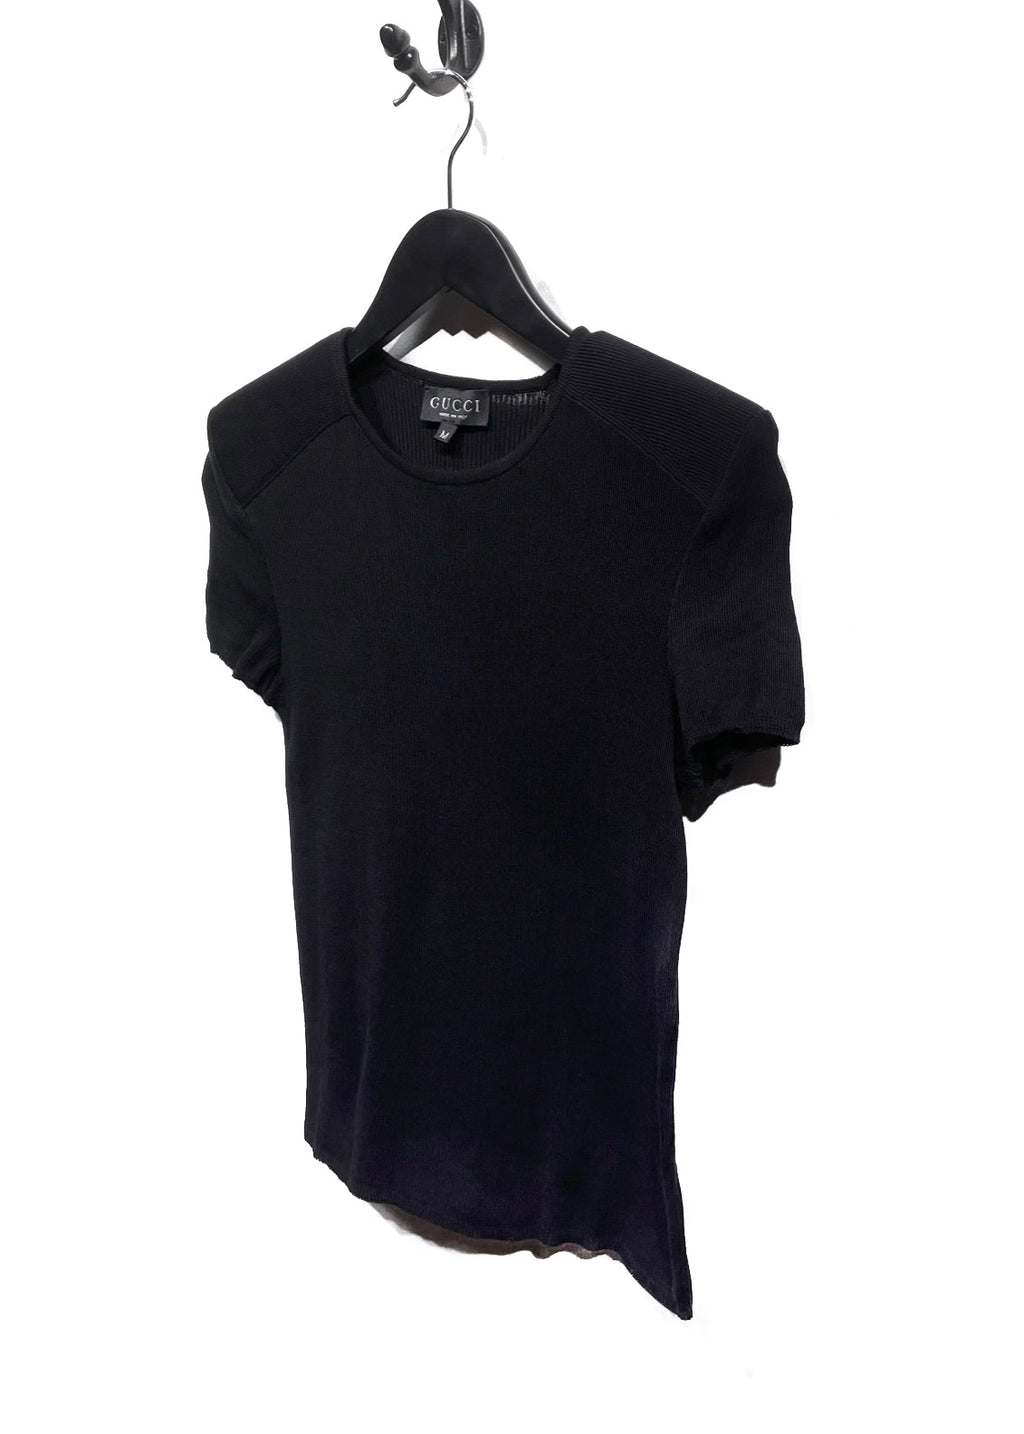 Gucci Black Knitted Padded Shoulder T-Shirt